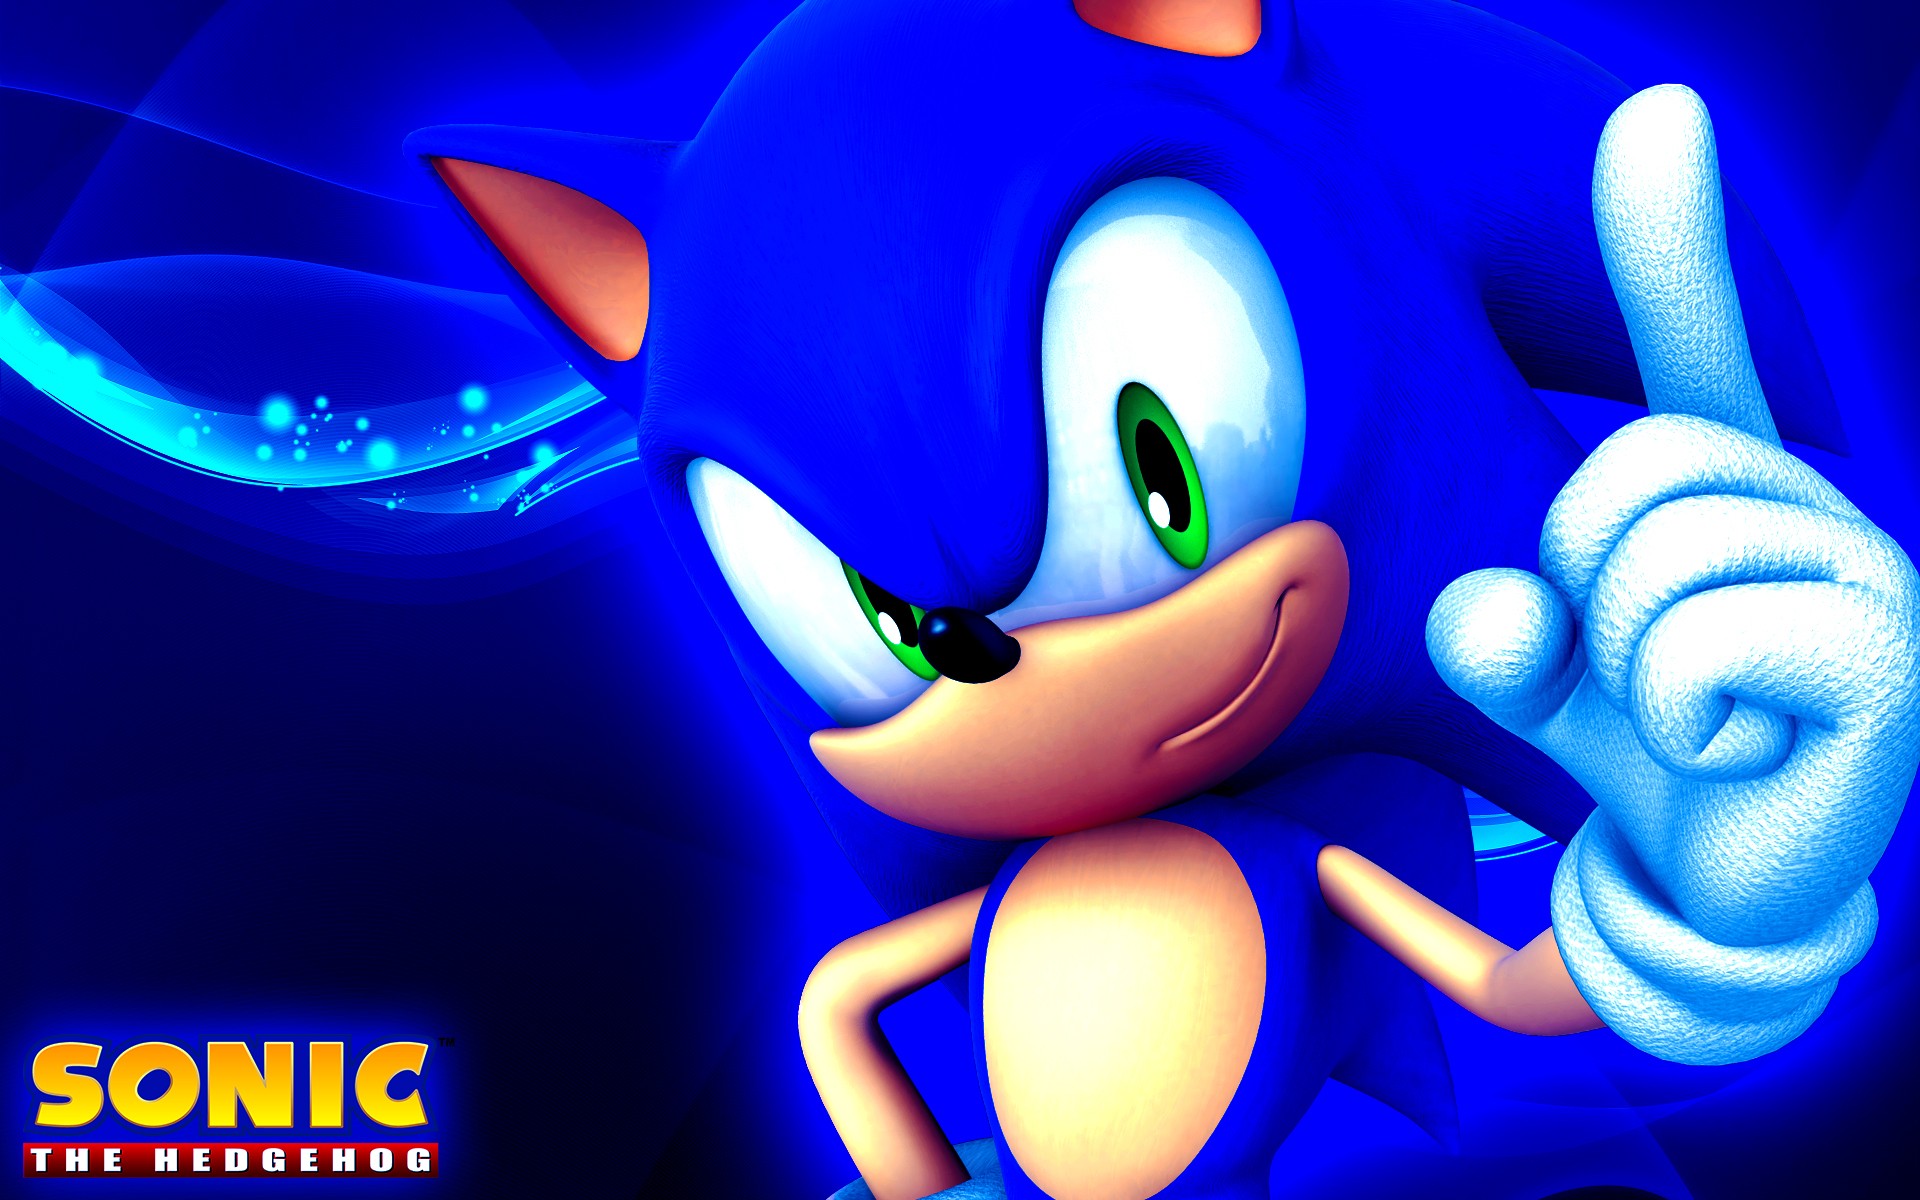 Sonic The Hedgehog Wallpapers, Pictures, Images